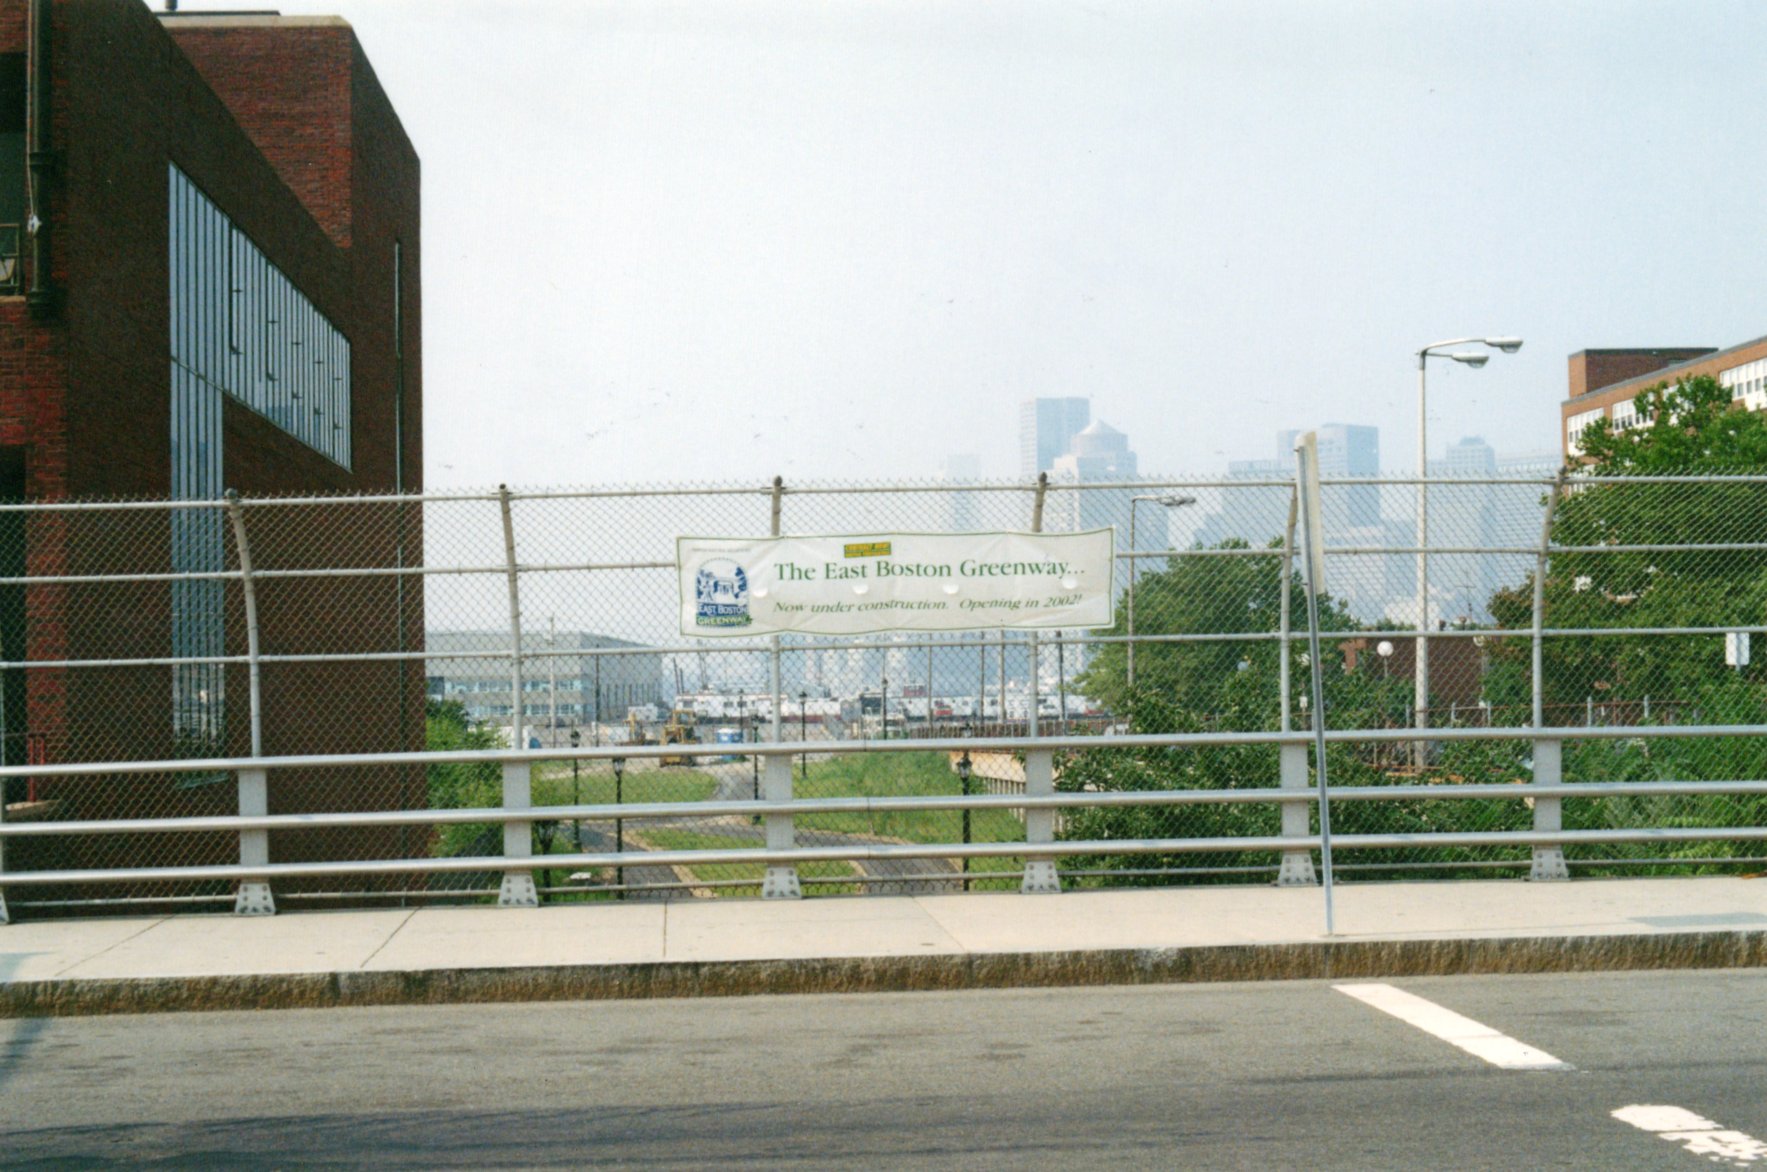 a banner celebrating the opening of the East Boston Greenway